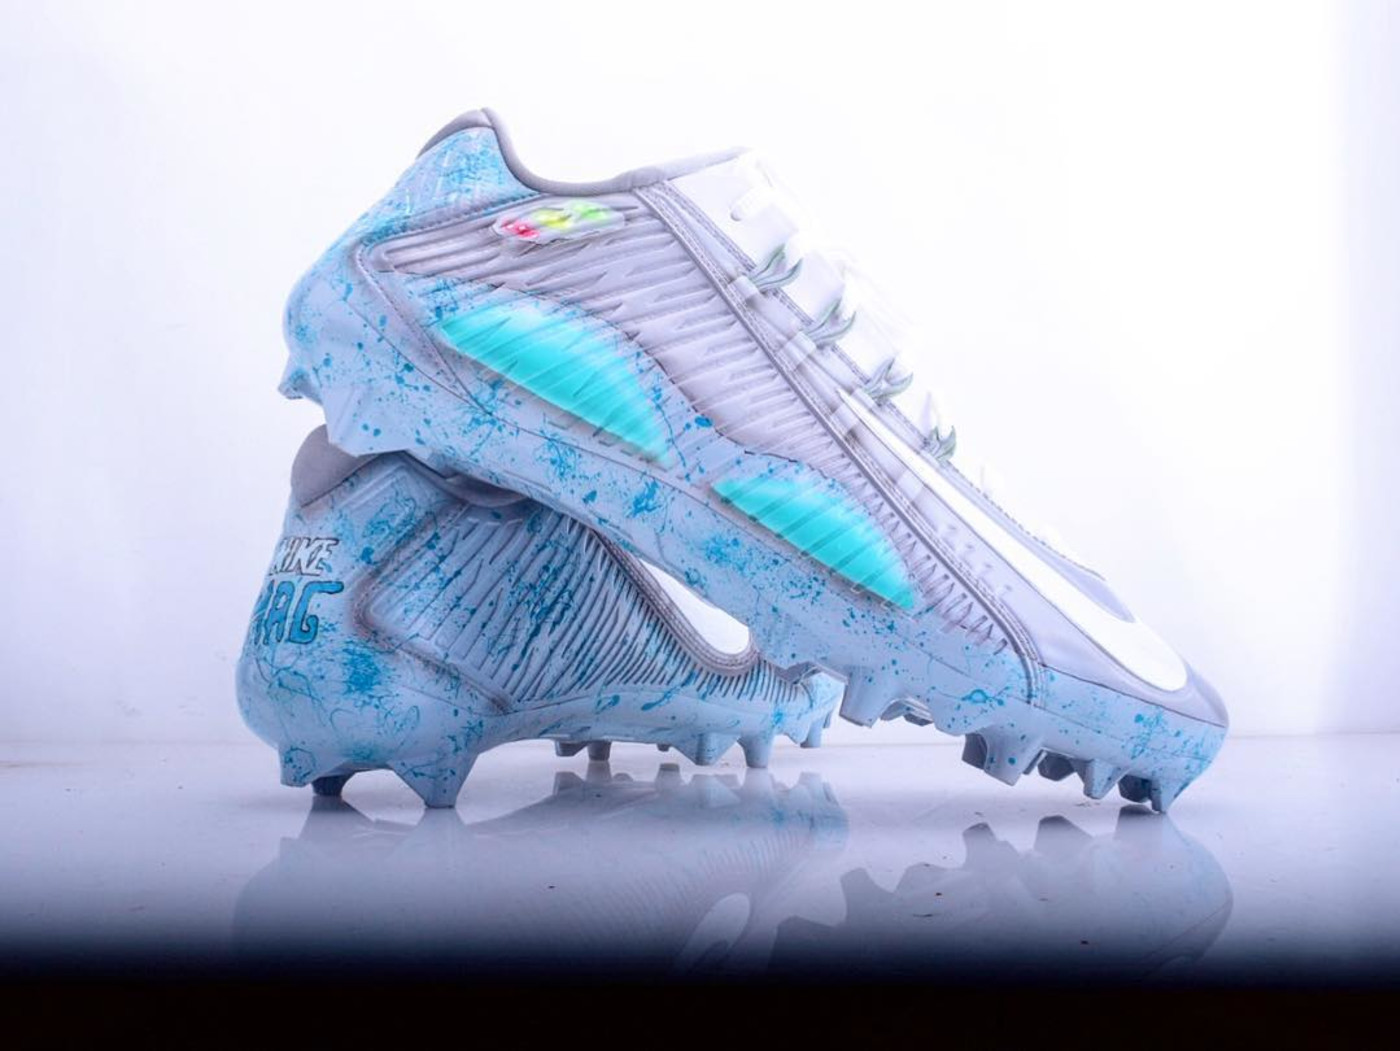 blue and green football cleats